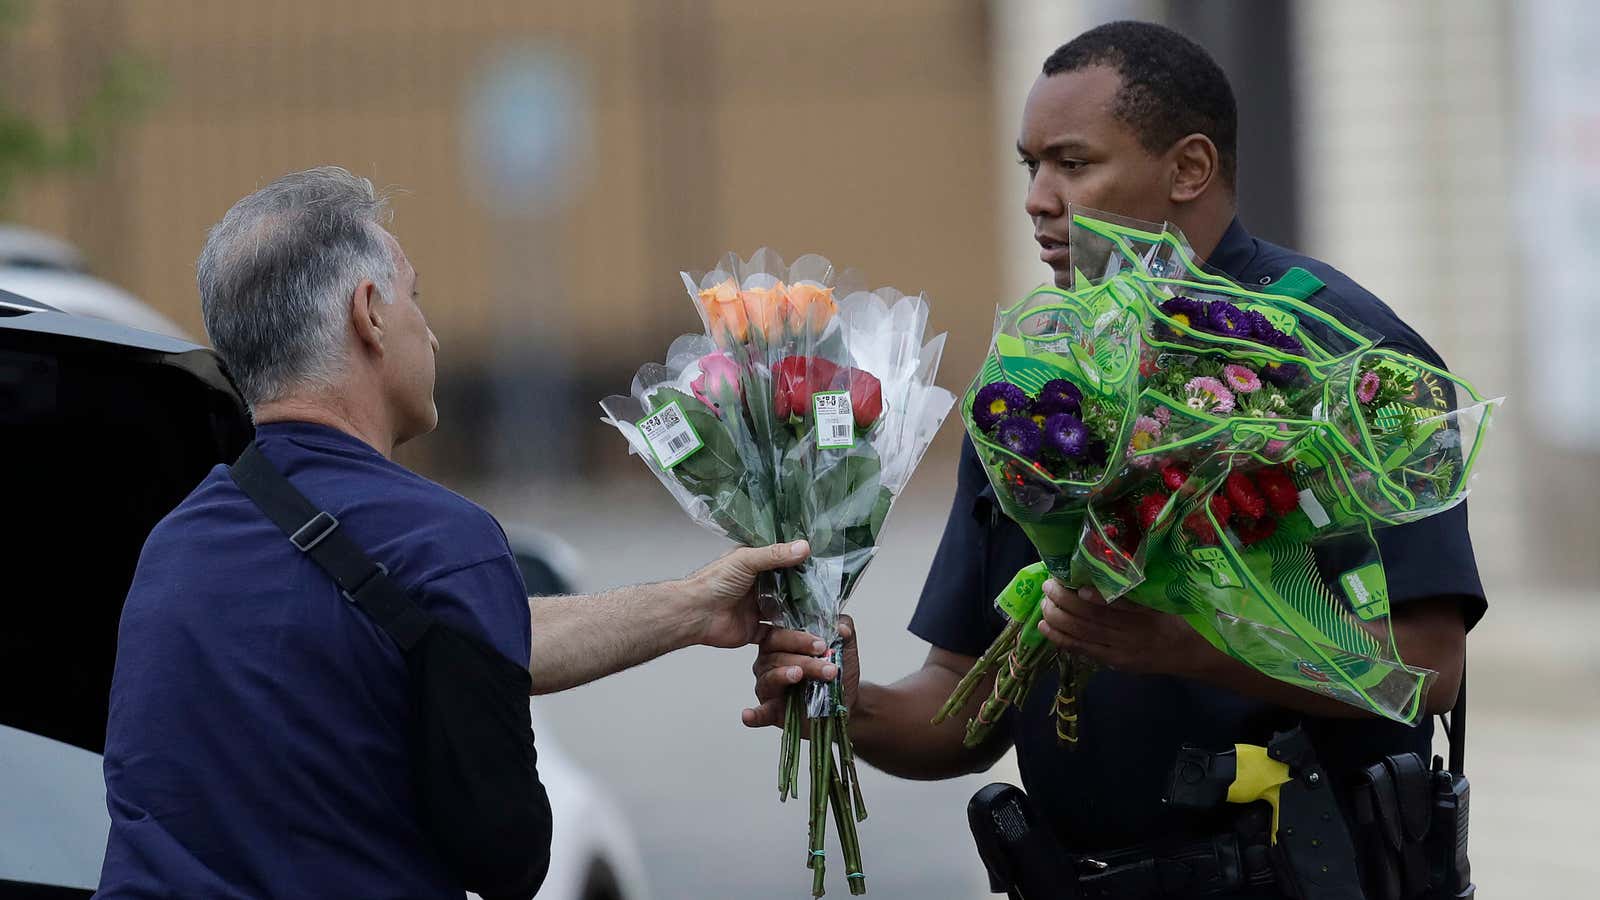 A Dallas police officer receivers flowers at a roadblock.